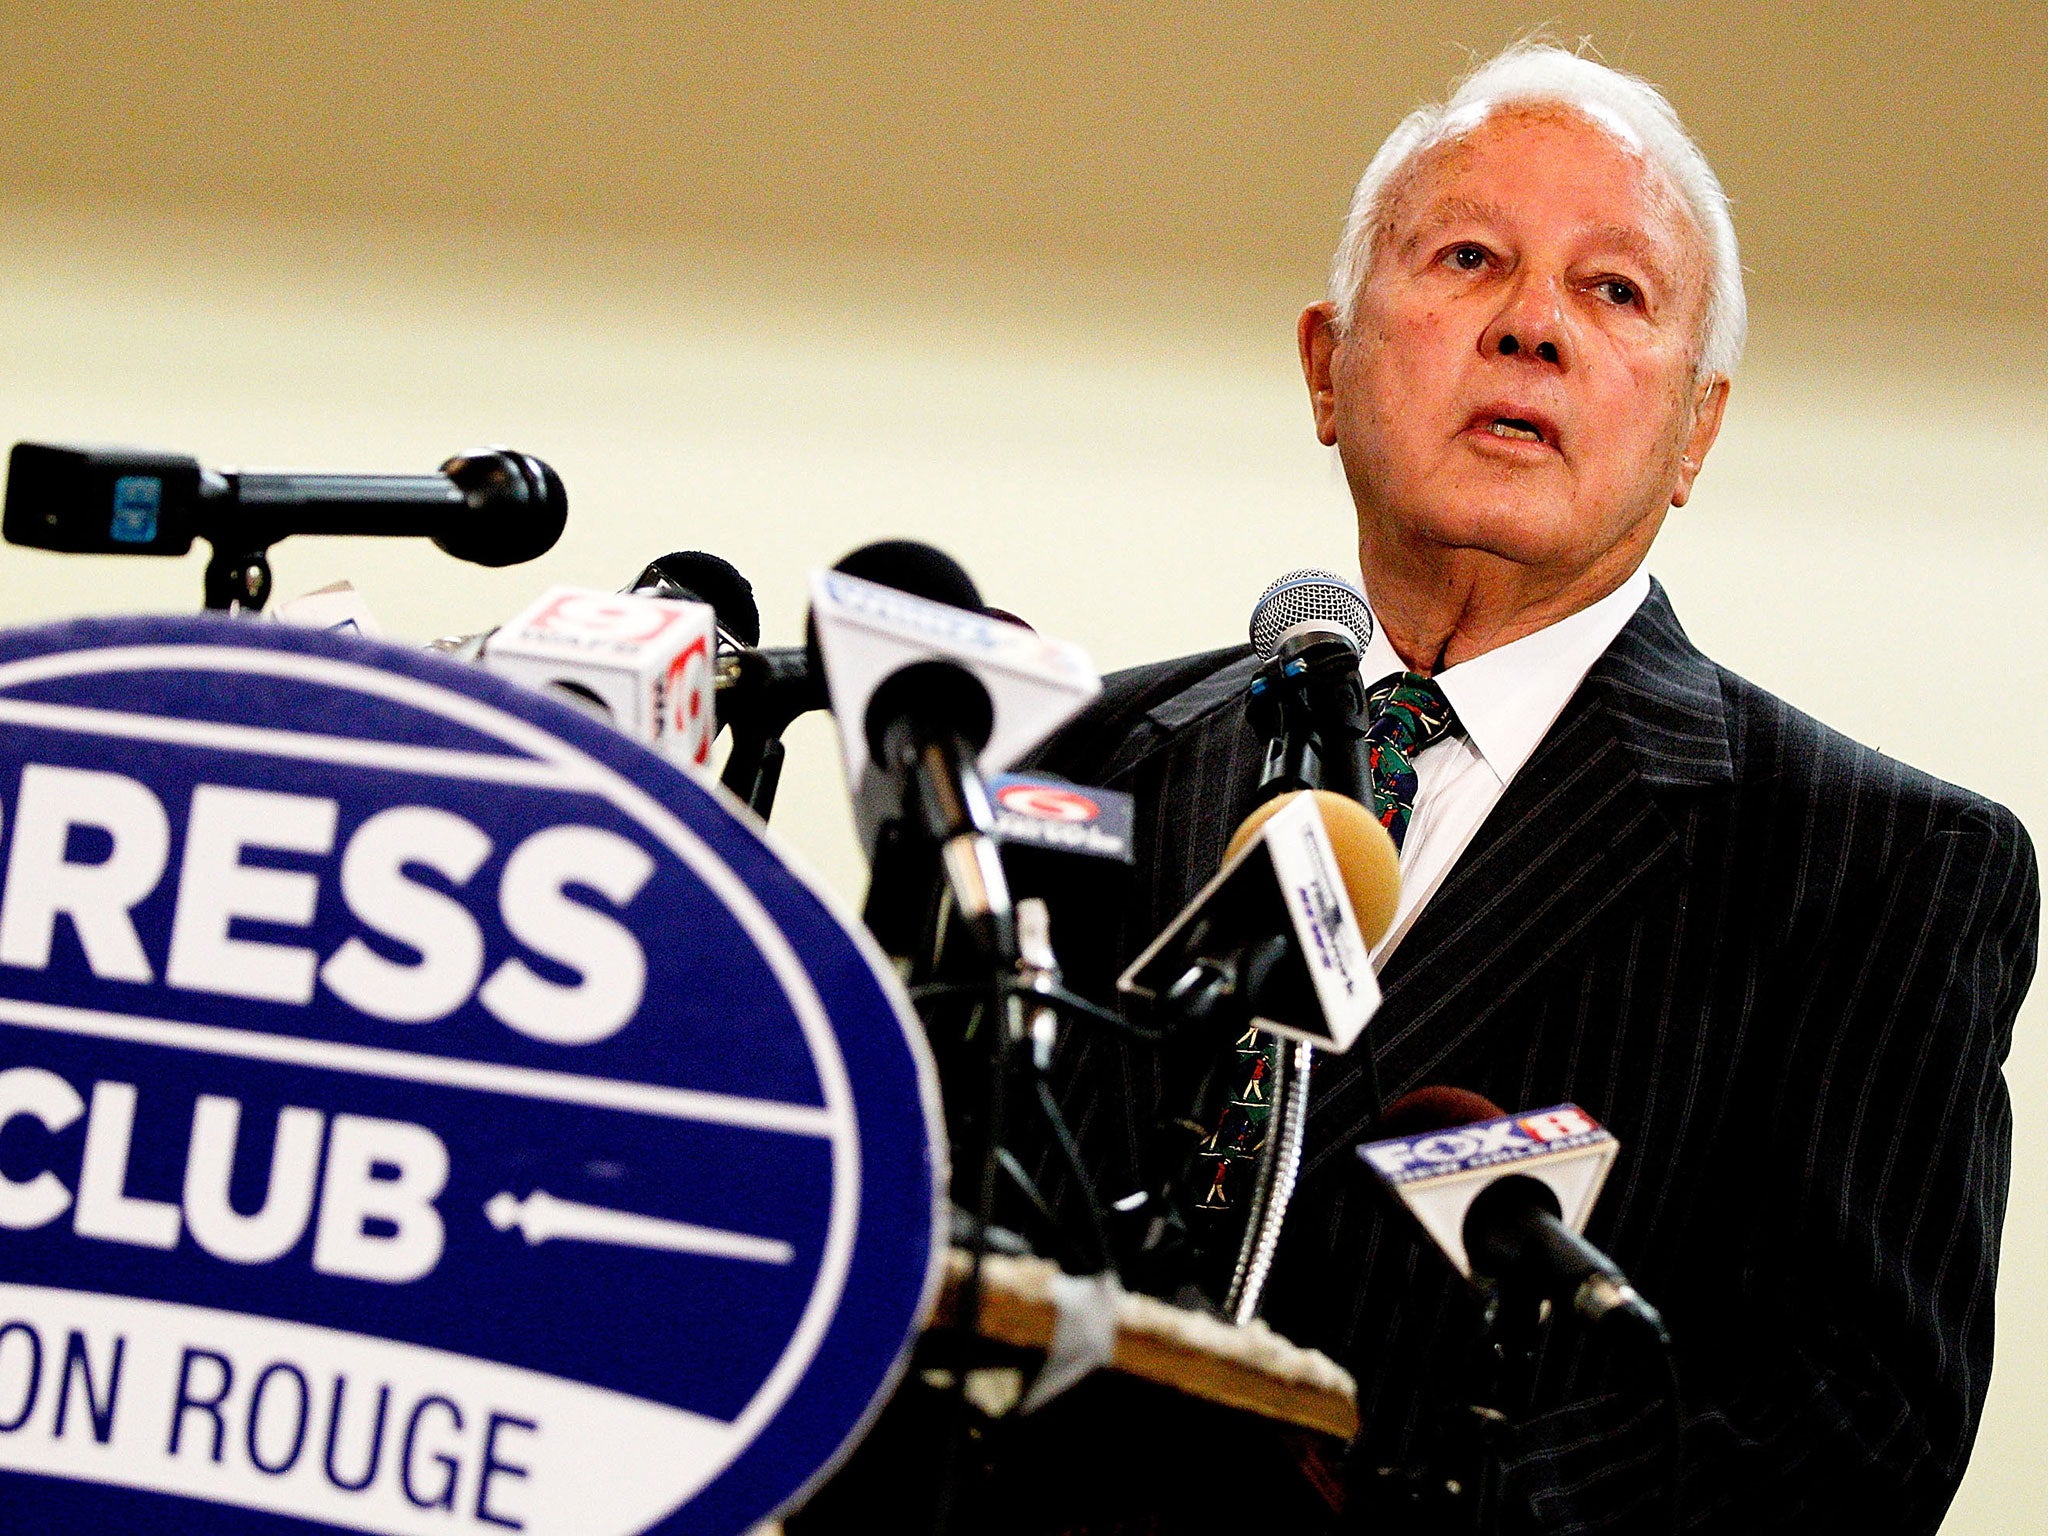 Edwin Edwards announces his run for U.S. Congress back in March